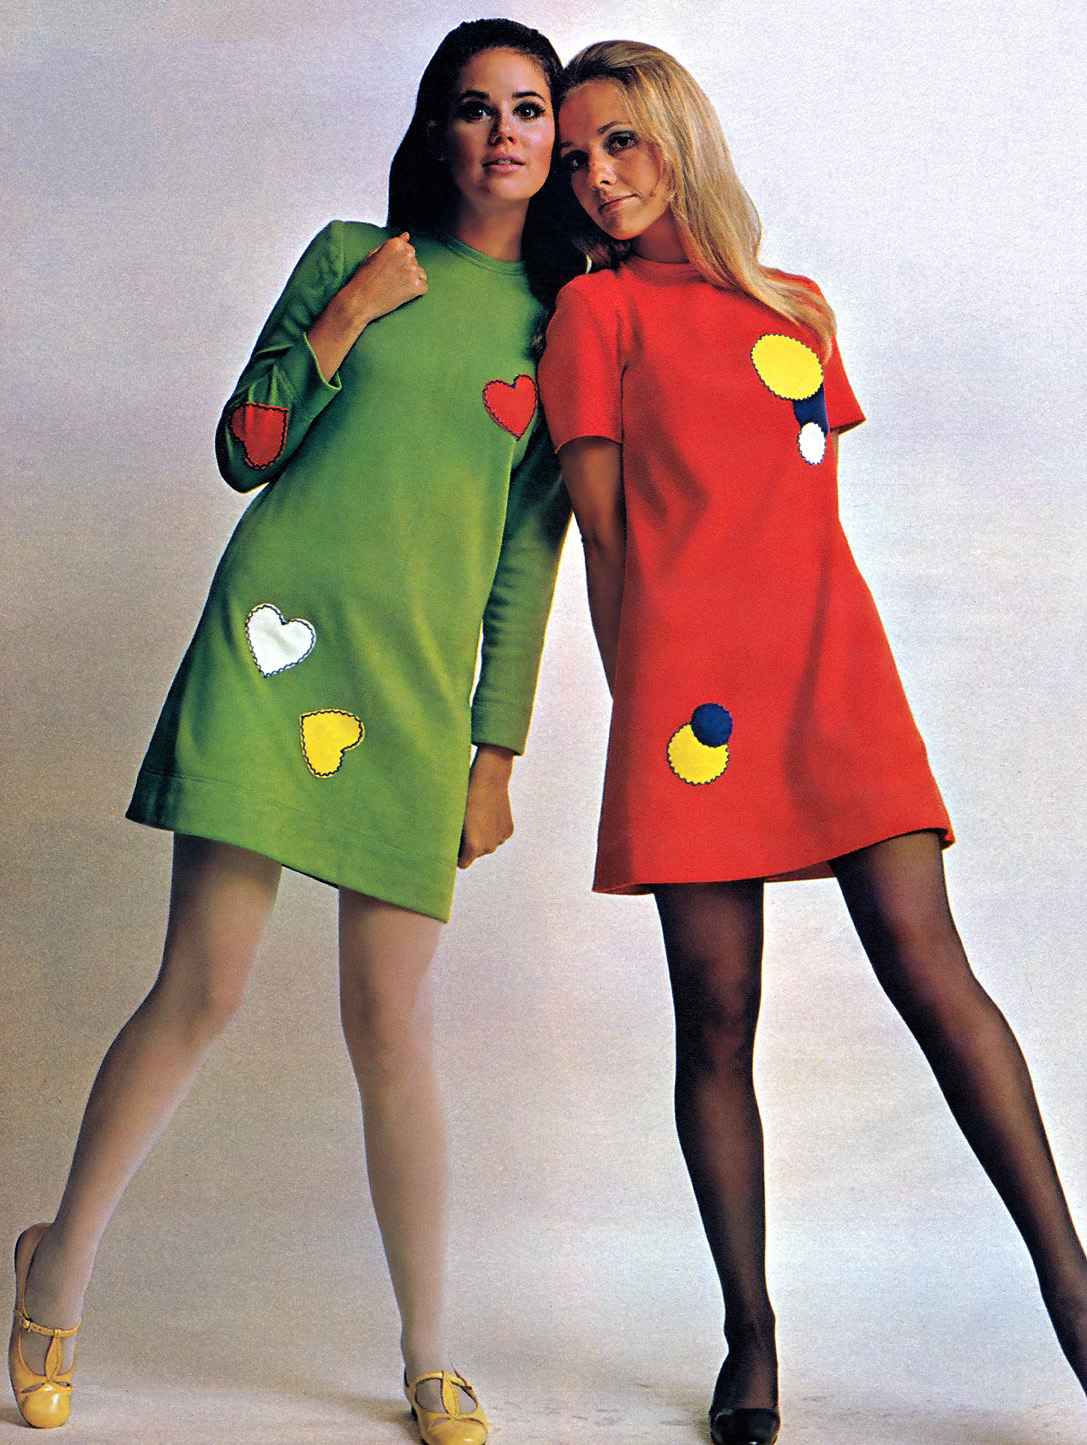 Colleen Corby & Cay Sanderson (JCPenney Catalog - 1969) [legs]